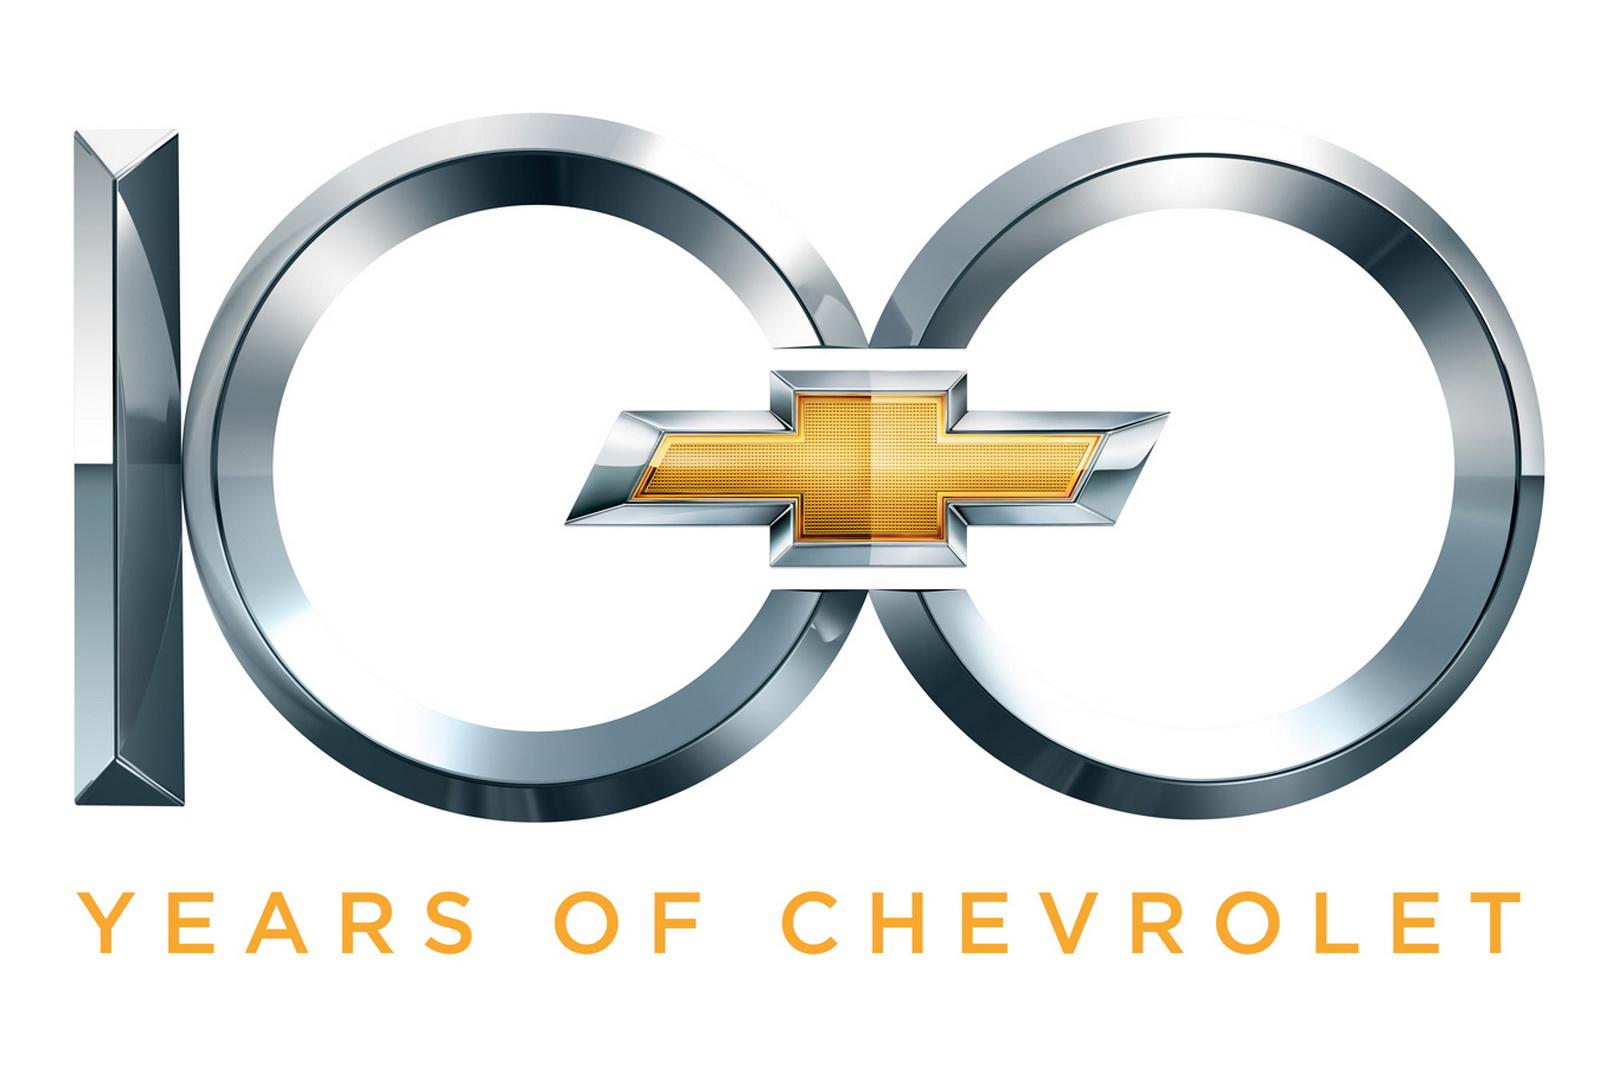 100 Years Of Chevrolet